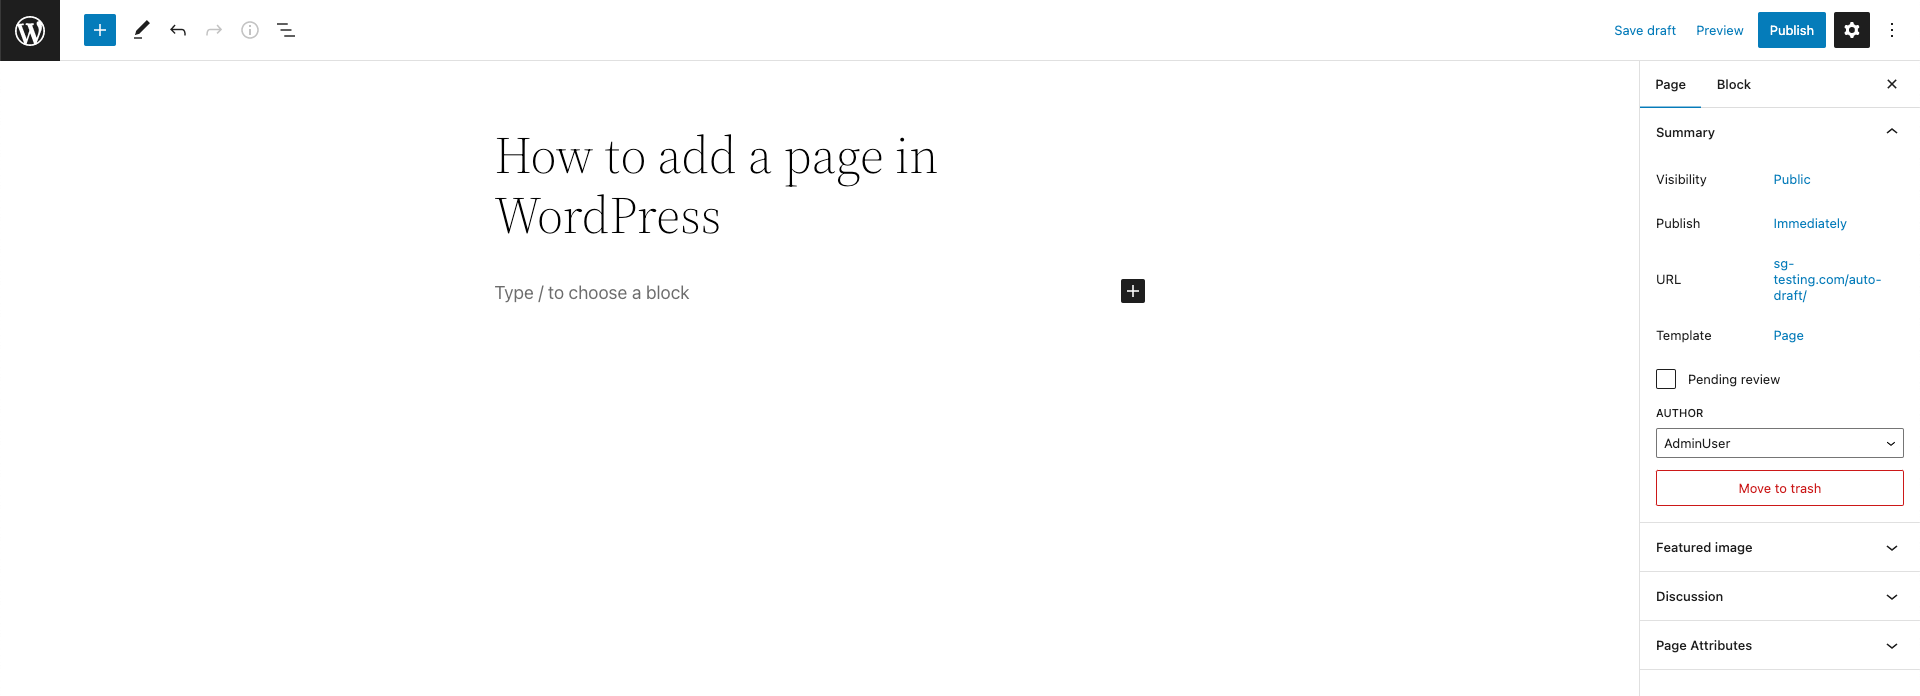 screenshot showing how to Add a page title in WordPress